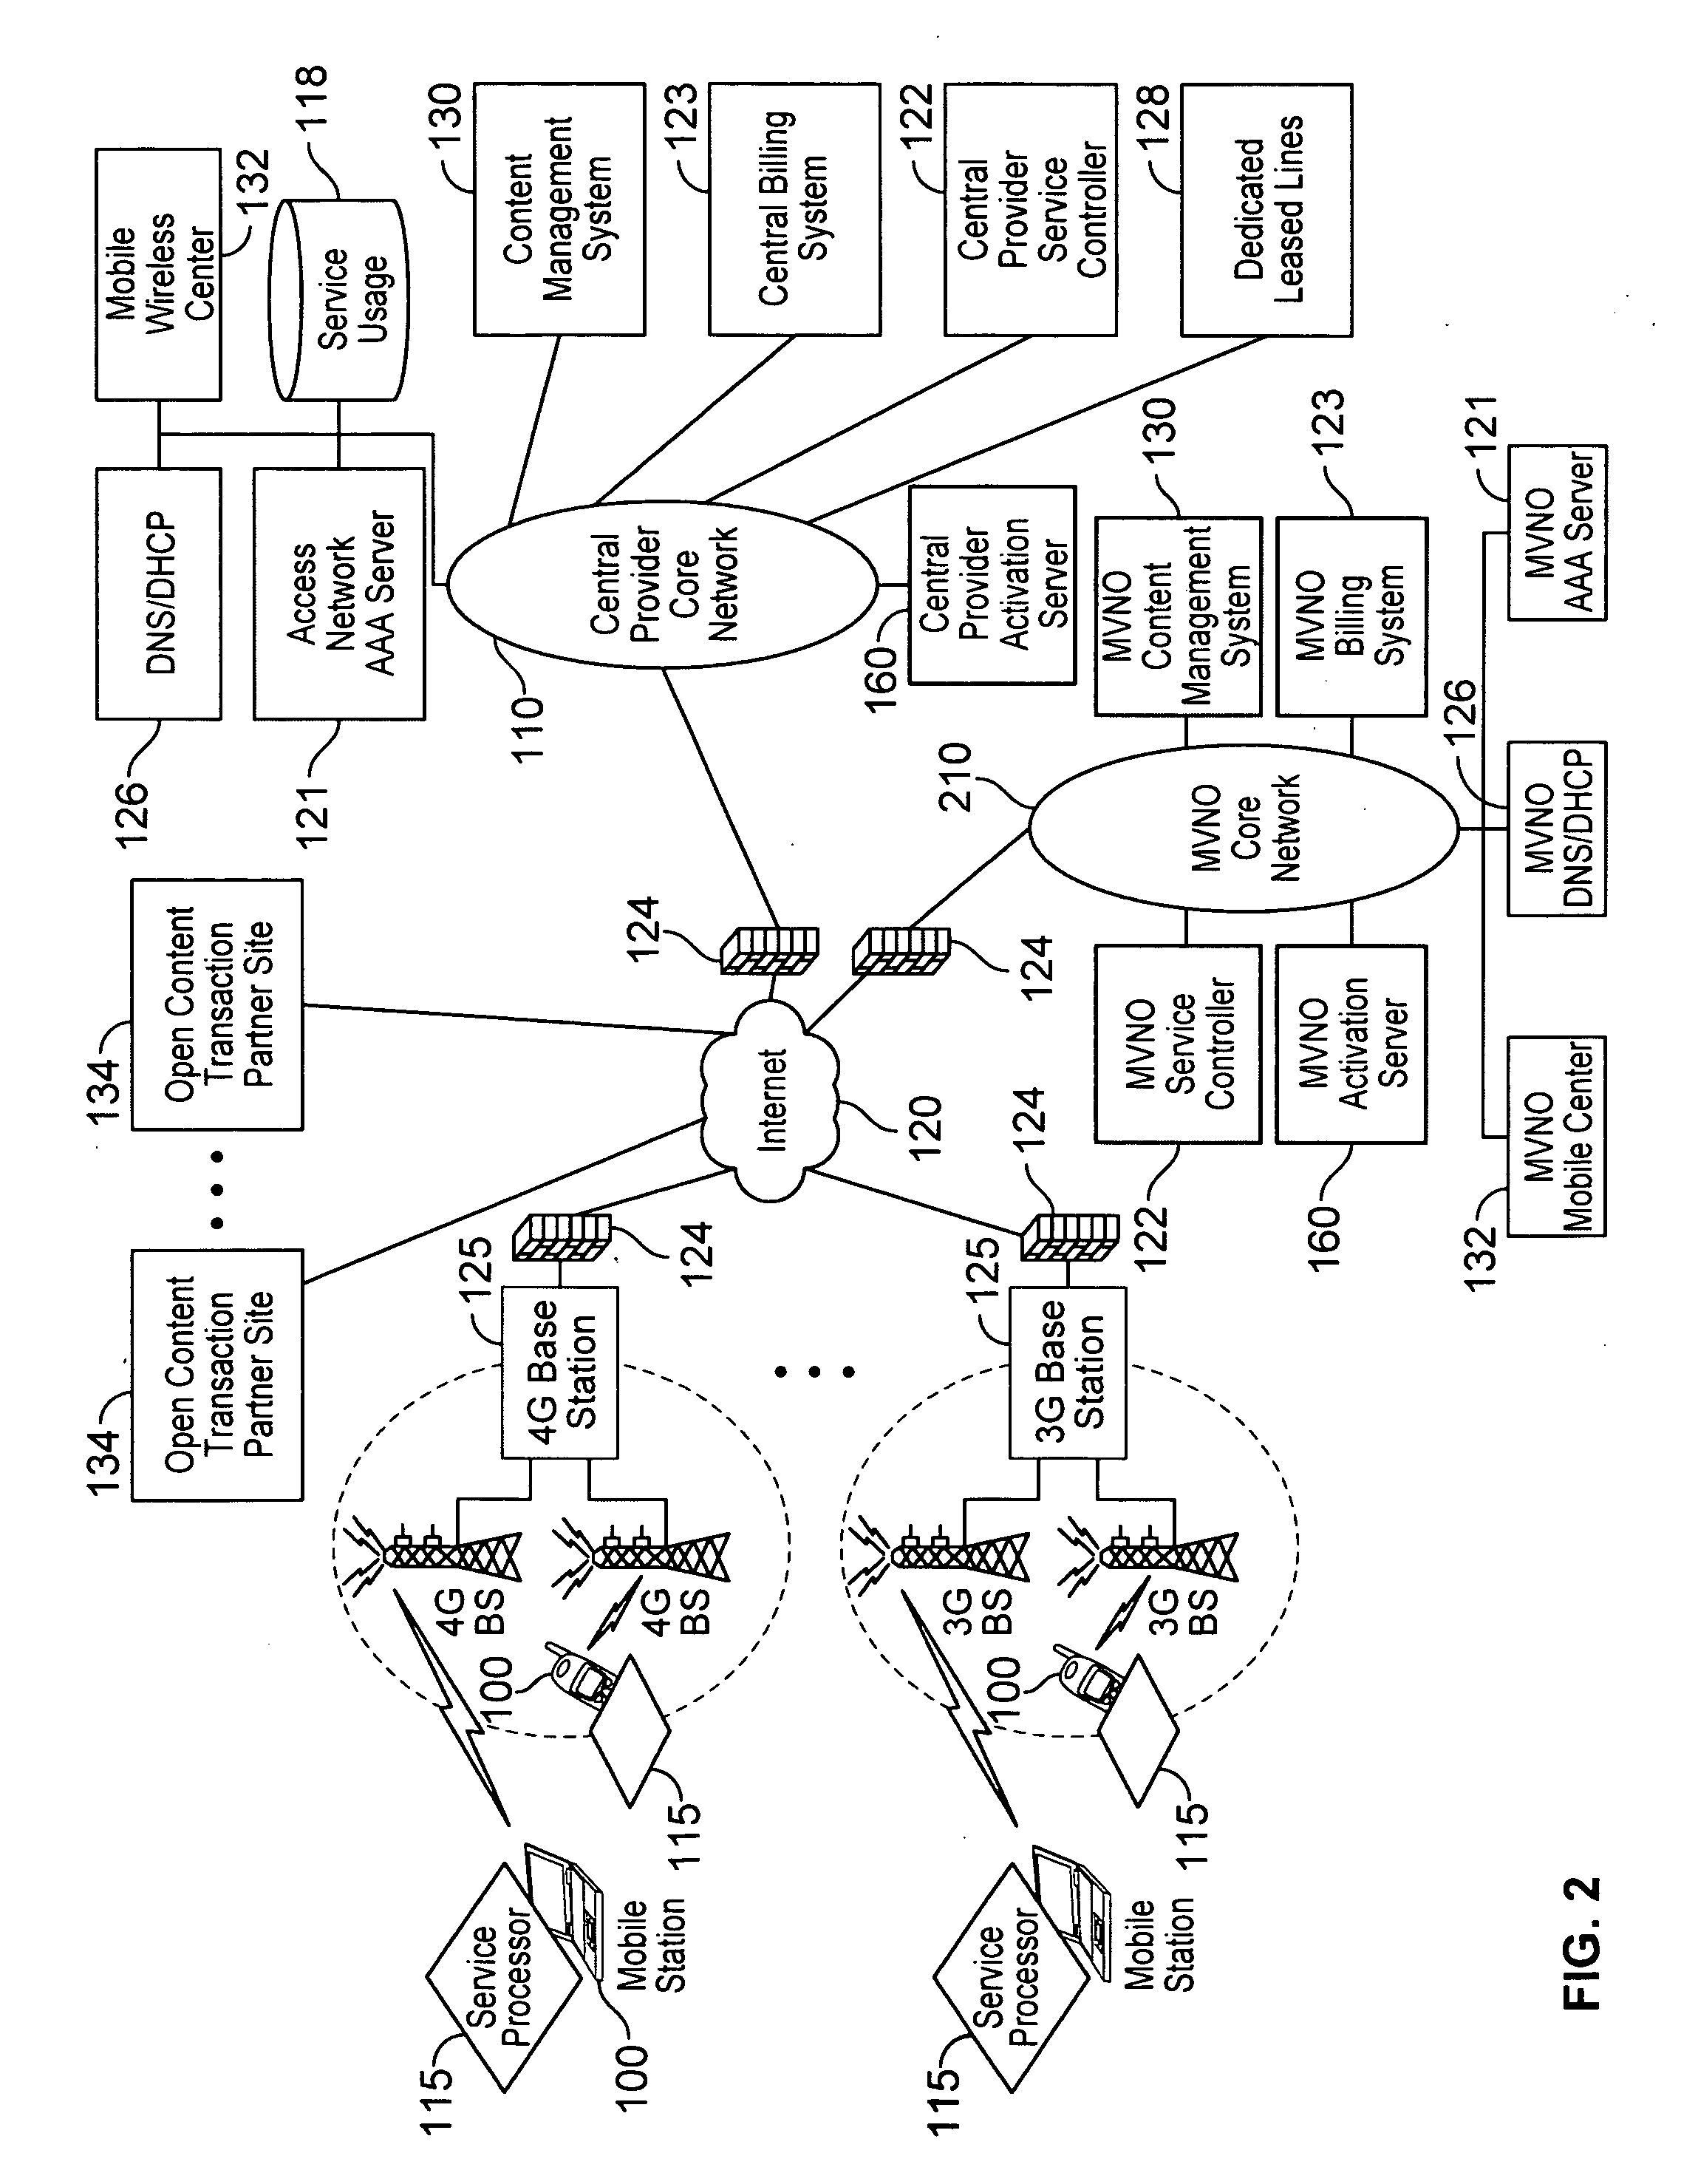 Service profile management with user preference, adaptive policy, network neutrality and user privacy for intermediate networking devices